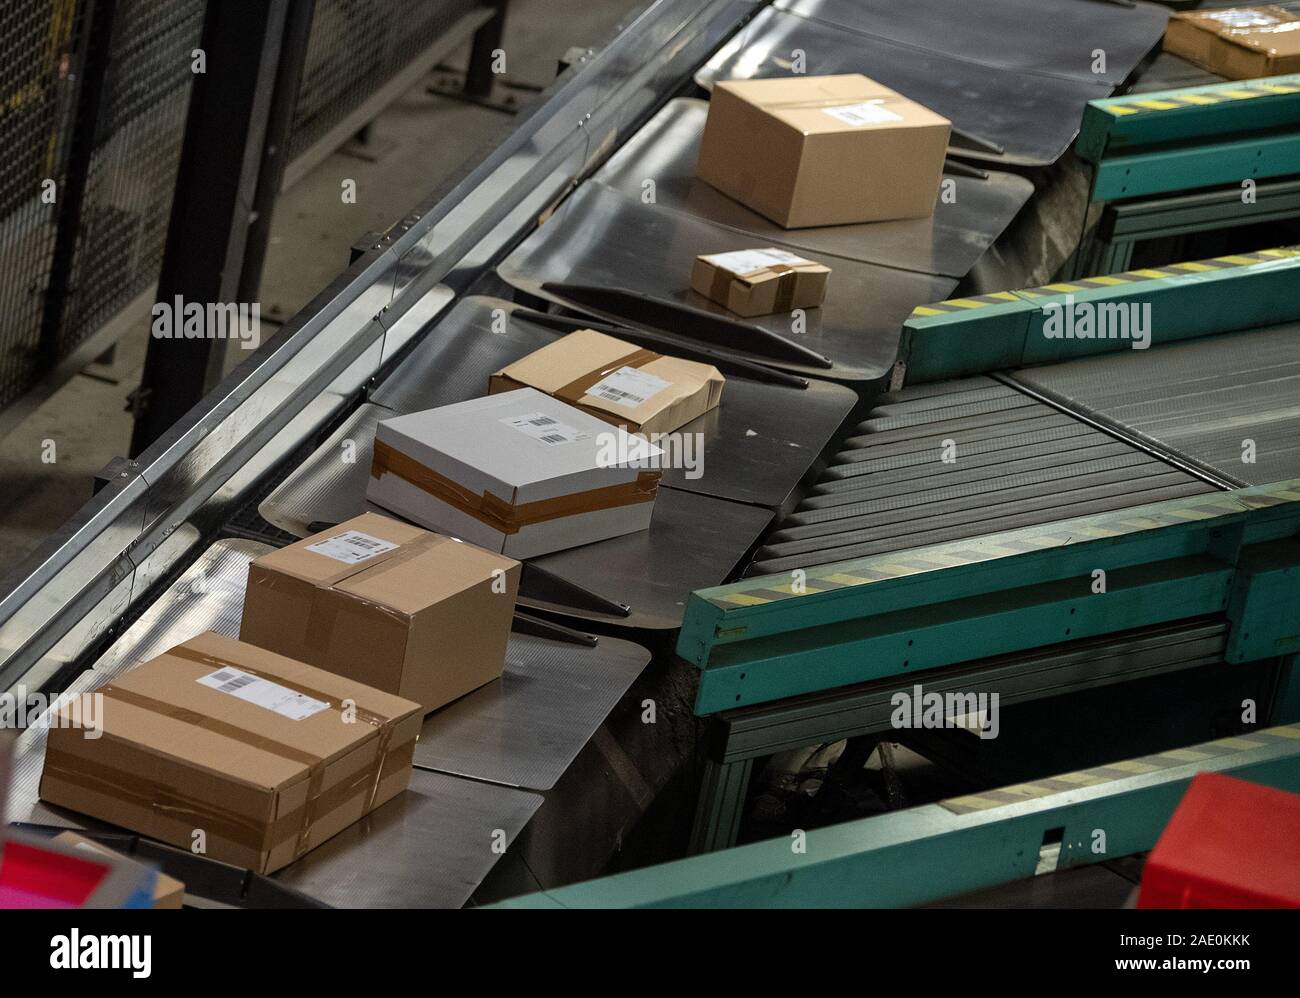 05 December 2019, Brandenburg, Börnicke: Numerous parcels travel on conveyor belts through the DHL-Paketzentrum. During Advent, up to 570,000 shipments a day arrive at their destination from Börnicke, with 200 additional employees deployed. Photo: Monika Skolimowska/dpa-Zentralbild/ZB Stock Photo